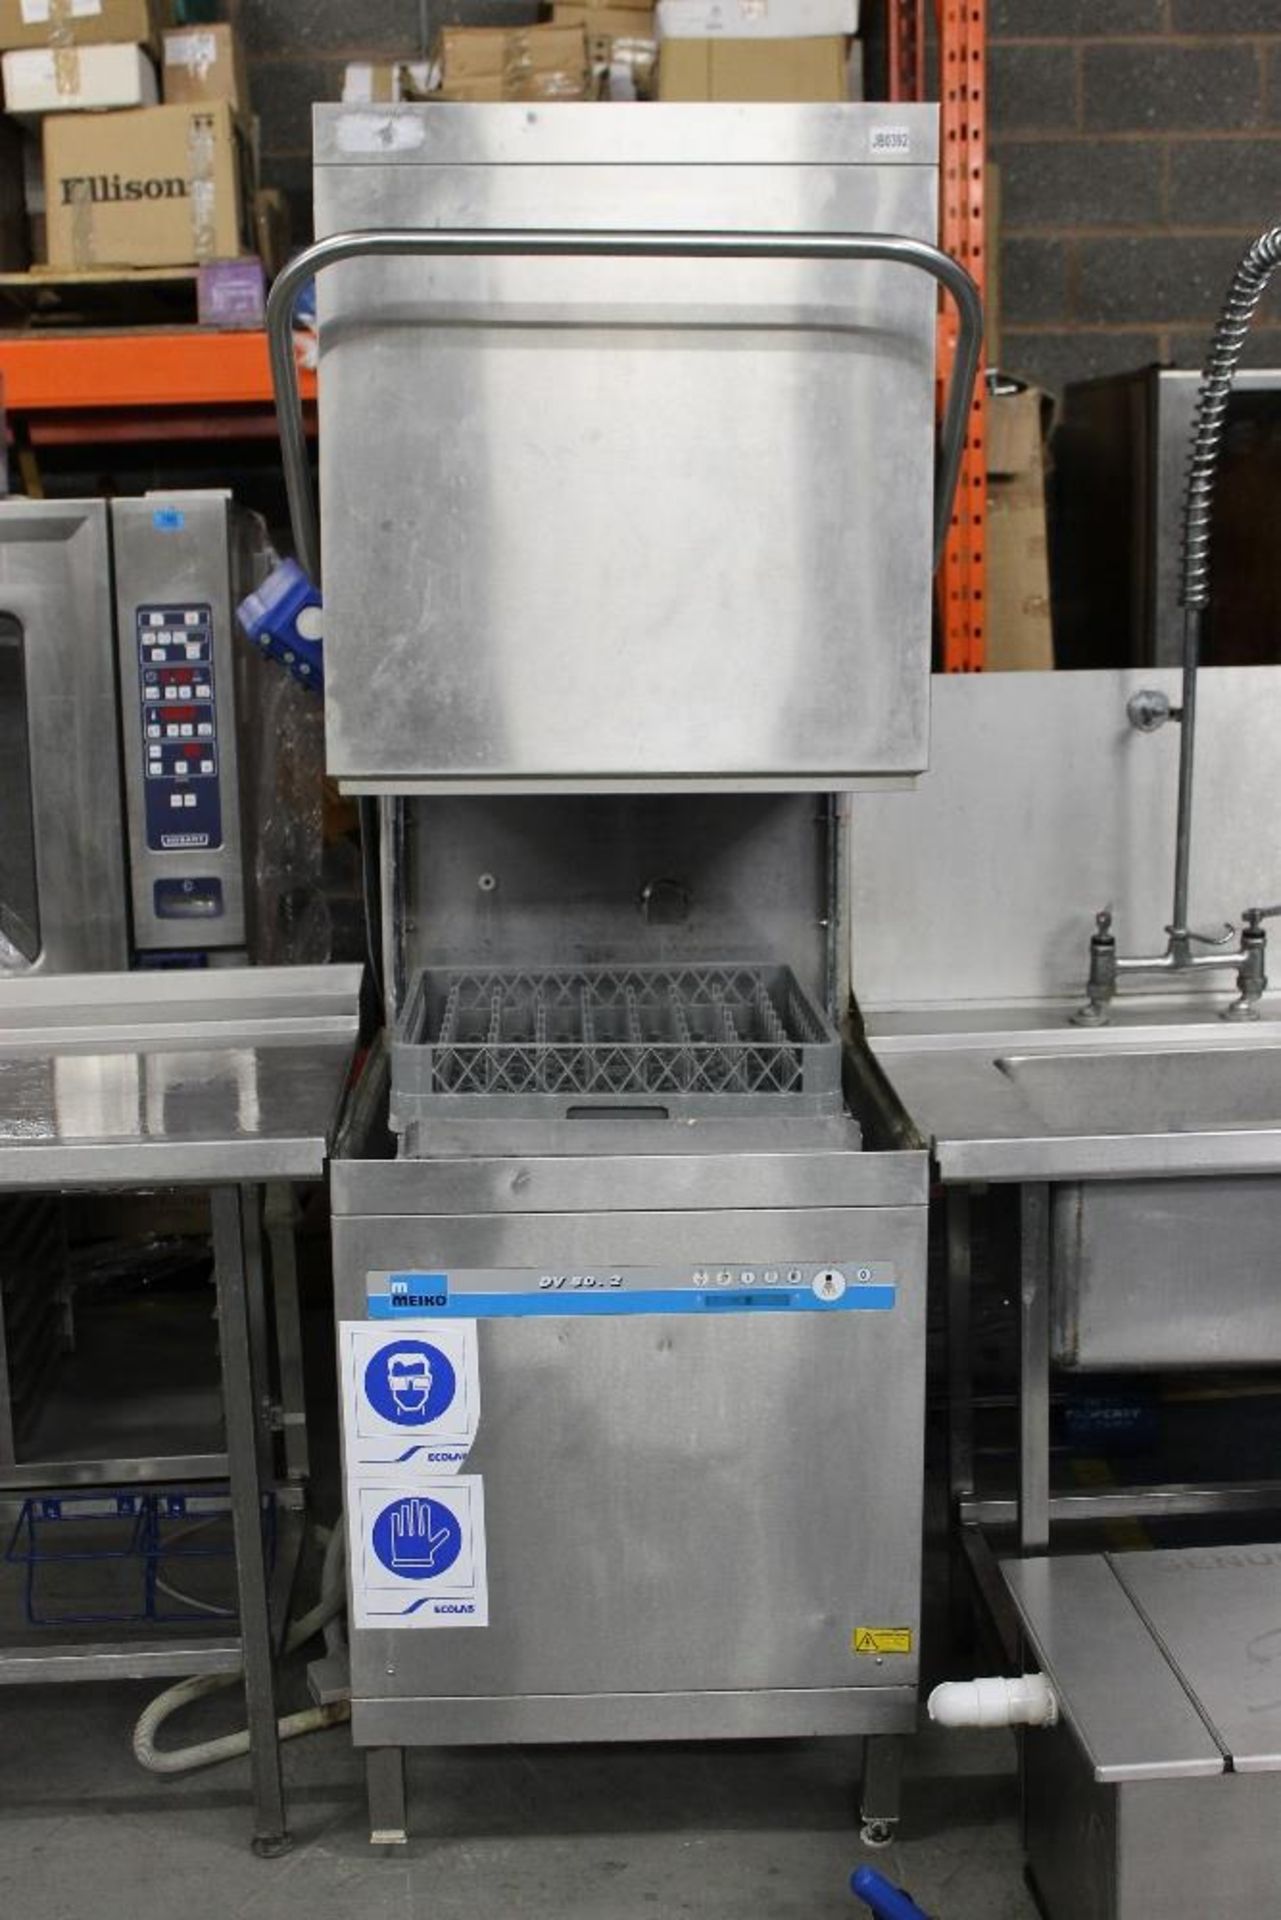 Meiko AV 80.2 Pass Through Dishwasher Complete Unit with Grease Trap Wash Baskets + Moffat Feed - Image 4 of 6